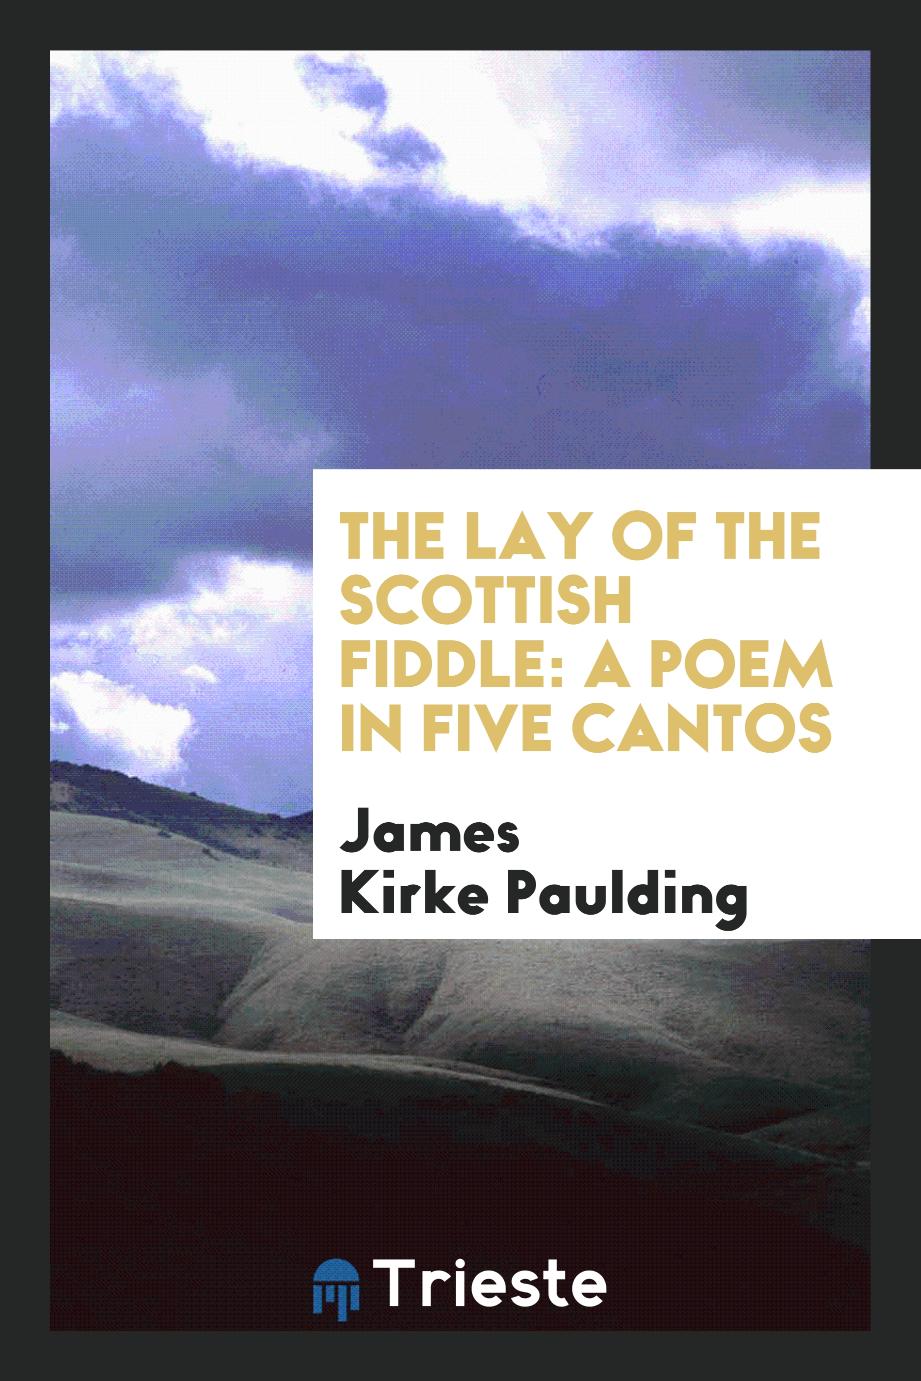 James Kirke Paulding - The lay of the Scottish fiddle: a poem in five cantos